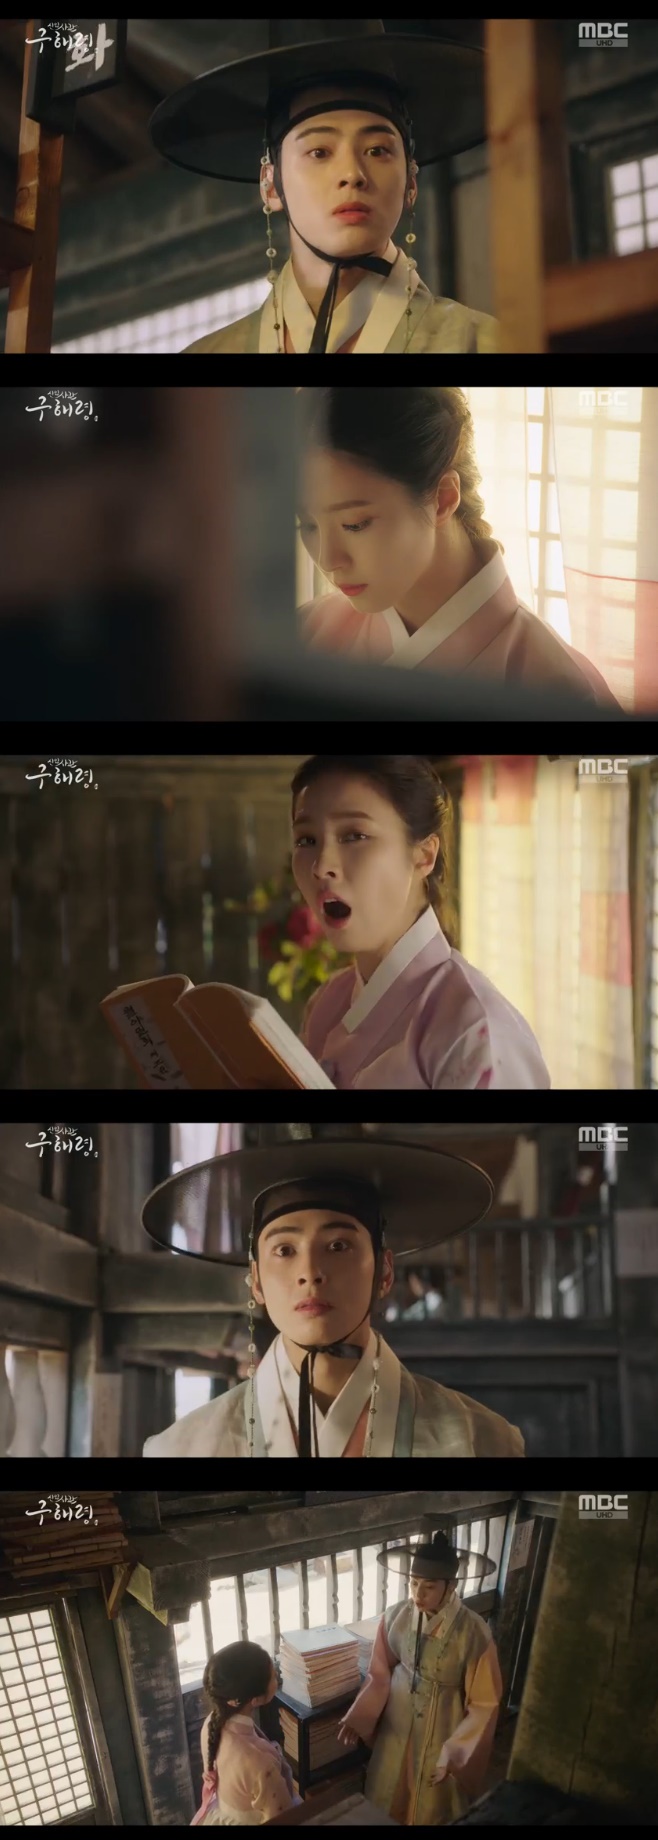 The first meeting between the new employee, Na Hae-ryung Shin Se-kyung and Jung Eun-woo, was unveiled.In MBCs new drama Na Hae-ryung (played by Kim Ho-su and director Kang Il-soo), which was first broadcast on the 17th, Prince Lee Rim (Chaung Eun-woo), who lives double as a popular romantic novelist plum, visited Heavens Bookstore on the day his new novel was published.Irim smiled at the look of Heavens Bookstore, which was caused by phosphoric acid to see his book.He looked around and saw Na Hae-ryung, who was reading his book at the Heavens Bookstore, and at first glance he was in love.Irim baroed his clothes and approached the old Na Hae-ryung, who yawned and when he met his eyes, he said, The book is so boring.I almost fell asleep.Irim asked, Why dont you like plum books? and Na Hae-ryung said, Do you have to like them? What is lacking is the words of Sunbee.While men and women are unusual, what scholar teaches them to speak to a half-hearted woman in the first place?Irim recounted the question by using the title as a parable, saying his honorific words: Na Hae-ryung was satisfied and explained one by one why the plum was not good.Theres nothing right about it, said Na Hae-ryung.I read this book and cried with my heart three times.  Once I was sorry for the expensive paper that I went into making this book, I was once used to write a book.Another time, I was afraid that the delusion of the author, Plum, would spread like an epidemic to the city. He said, If you have a human conscience that makes money, you should make a sacrifice. He left first.